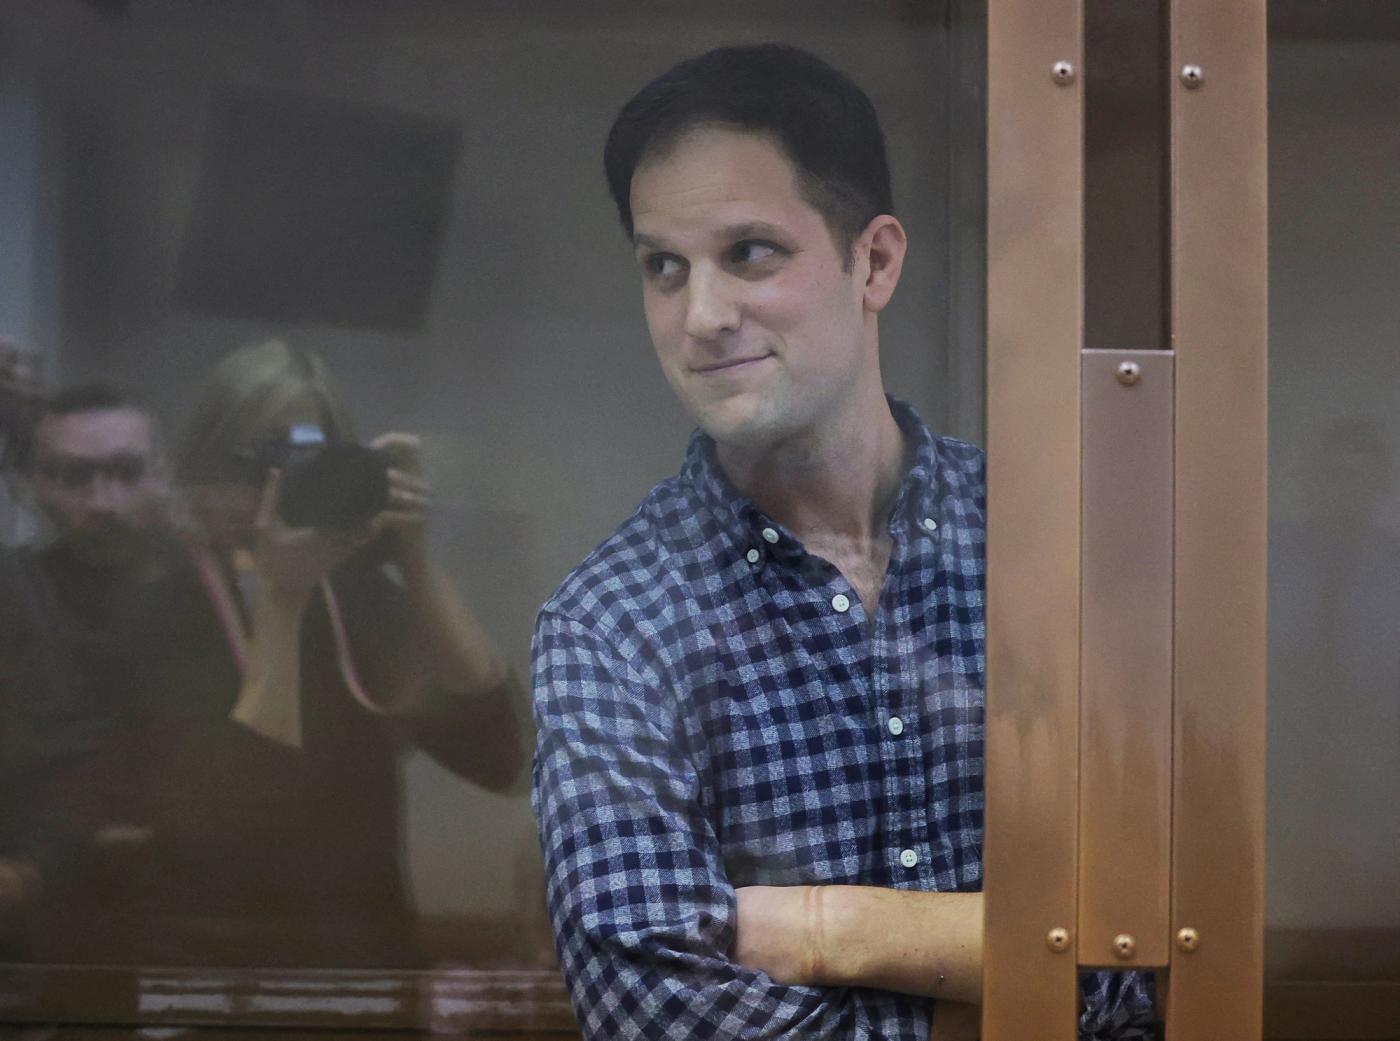 Wall Street Journal reporter Evan Gershkovich, who was detained in March while on a reporting trip and charged with espionage, stands behind a glass wall of an enclosure for defendants before a court hearing to consider an appeal against his detention, in Moscow, Russia April 18, 2023.